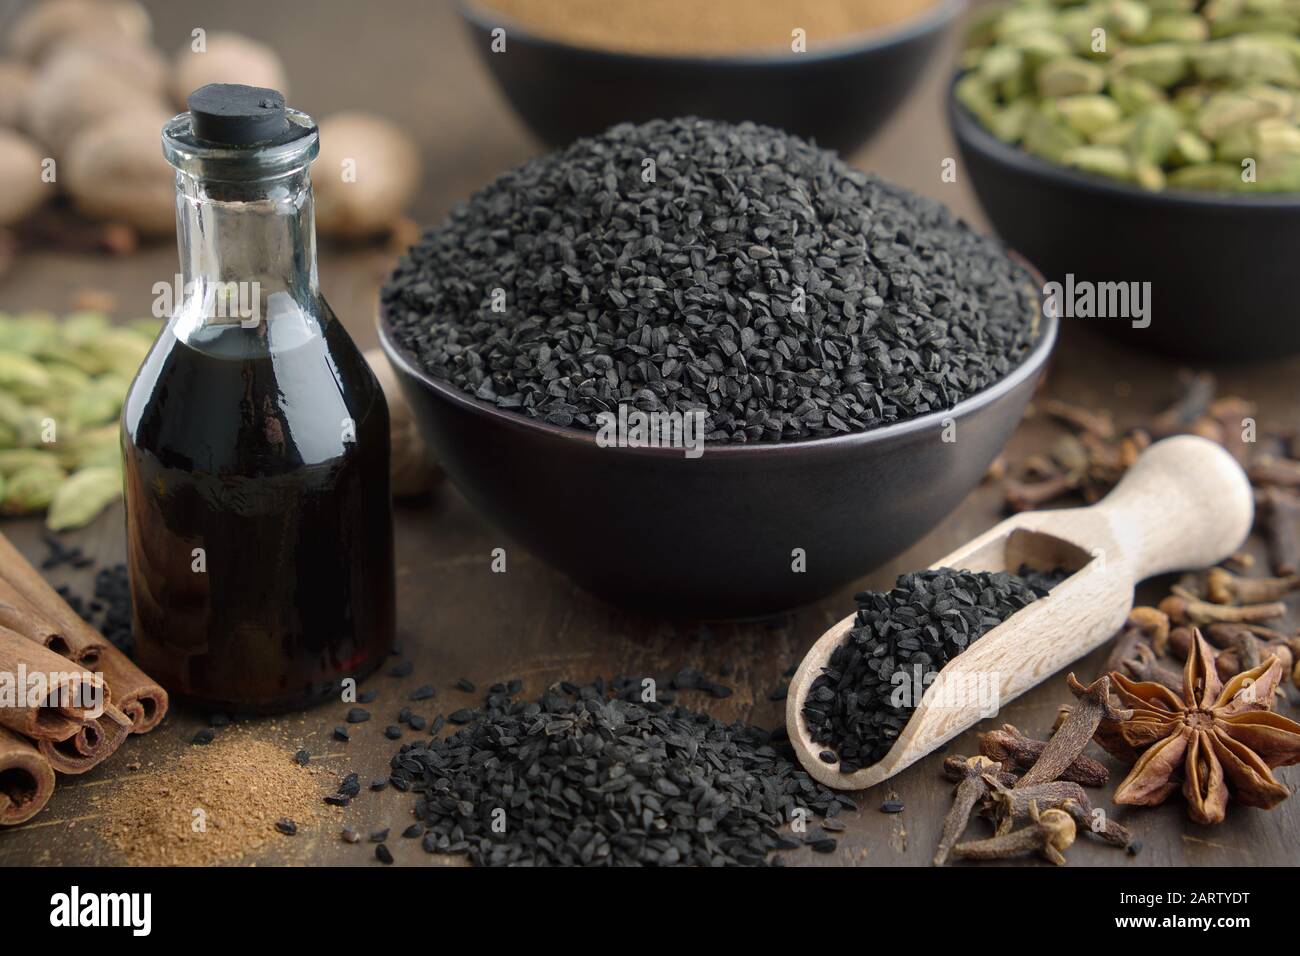 Black Cumin Or Roman Coriander Seeds And Black Caraway Oil Bottles Aromatic Spices On Table Cardamom Anise Cloves Cinnamon Turmeric Ingredient Stock Photo Alamy